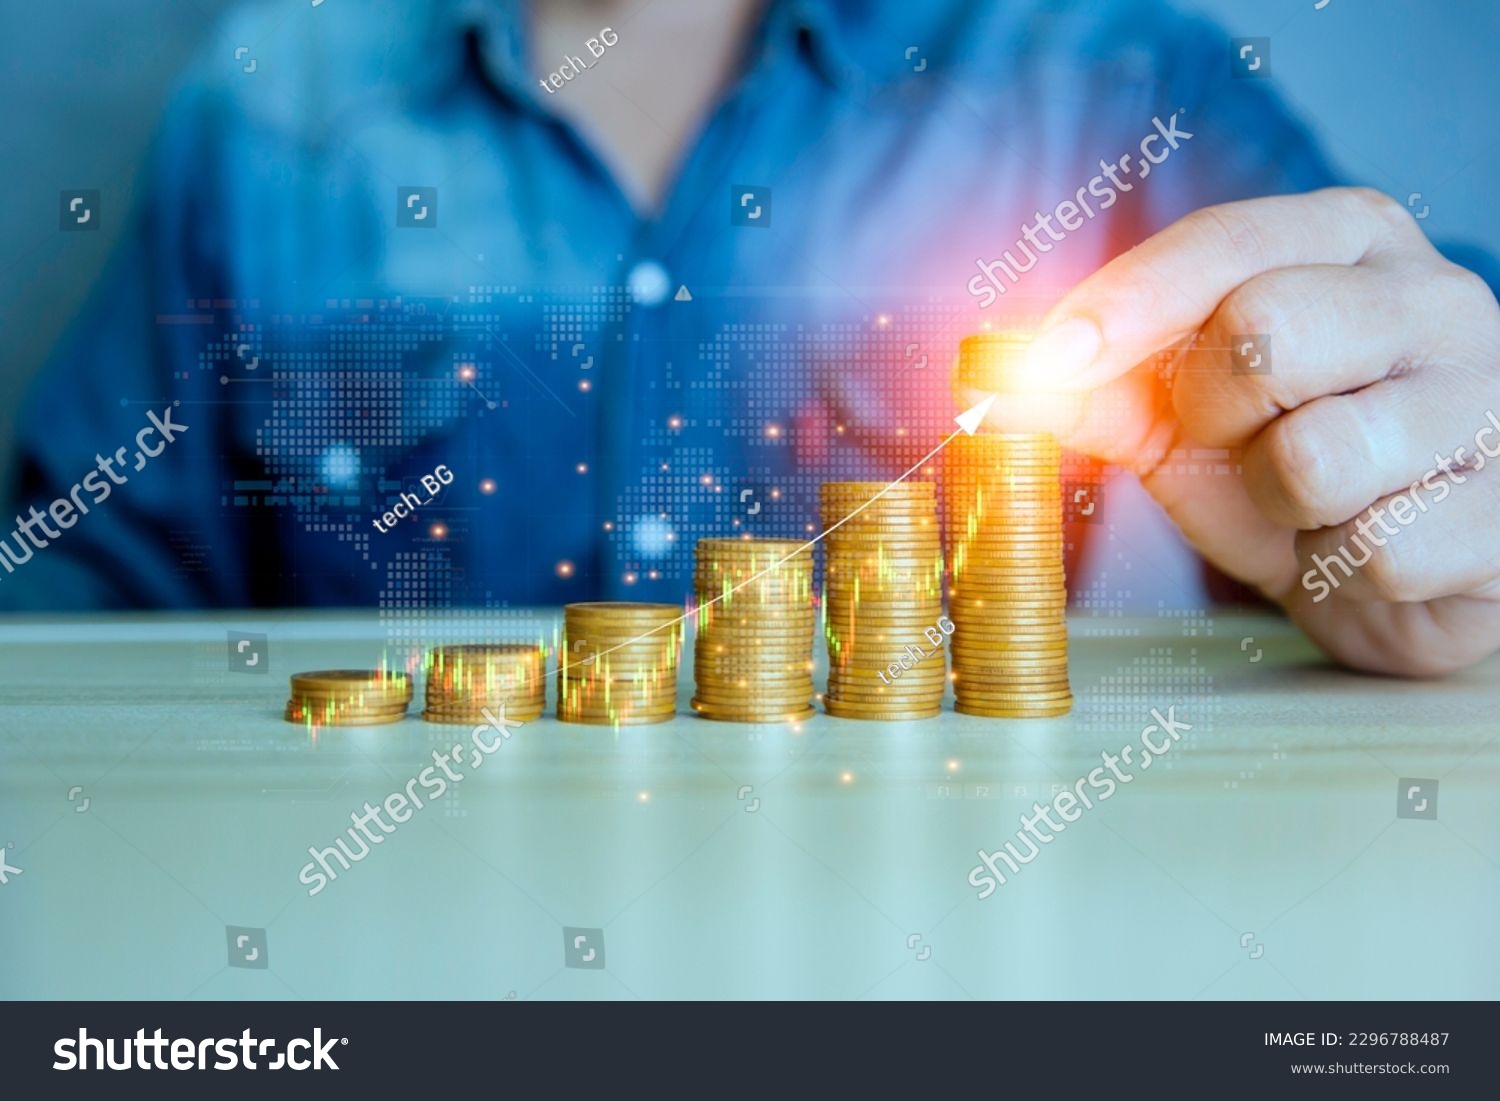 Stock Funding, coins graphed. Business success investment stock wealth concept. Coin graphs show increasing inflation. Coin graphs show increasing inflation. stock market volatility. #2296788487